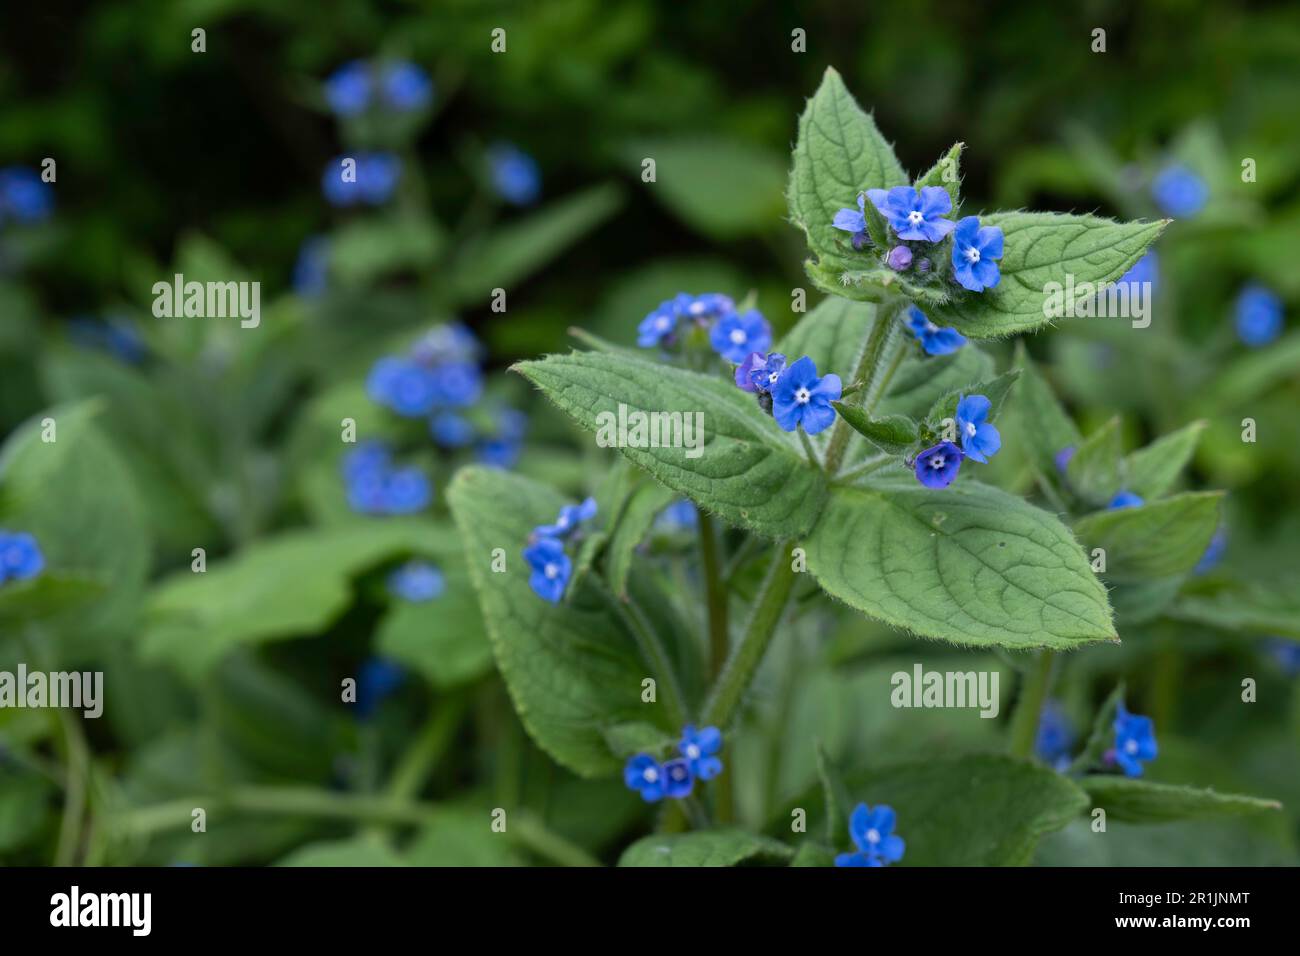 Blue flowers of the comfrey or Symphytum officinale plant in a garden Stock Photo